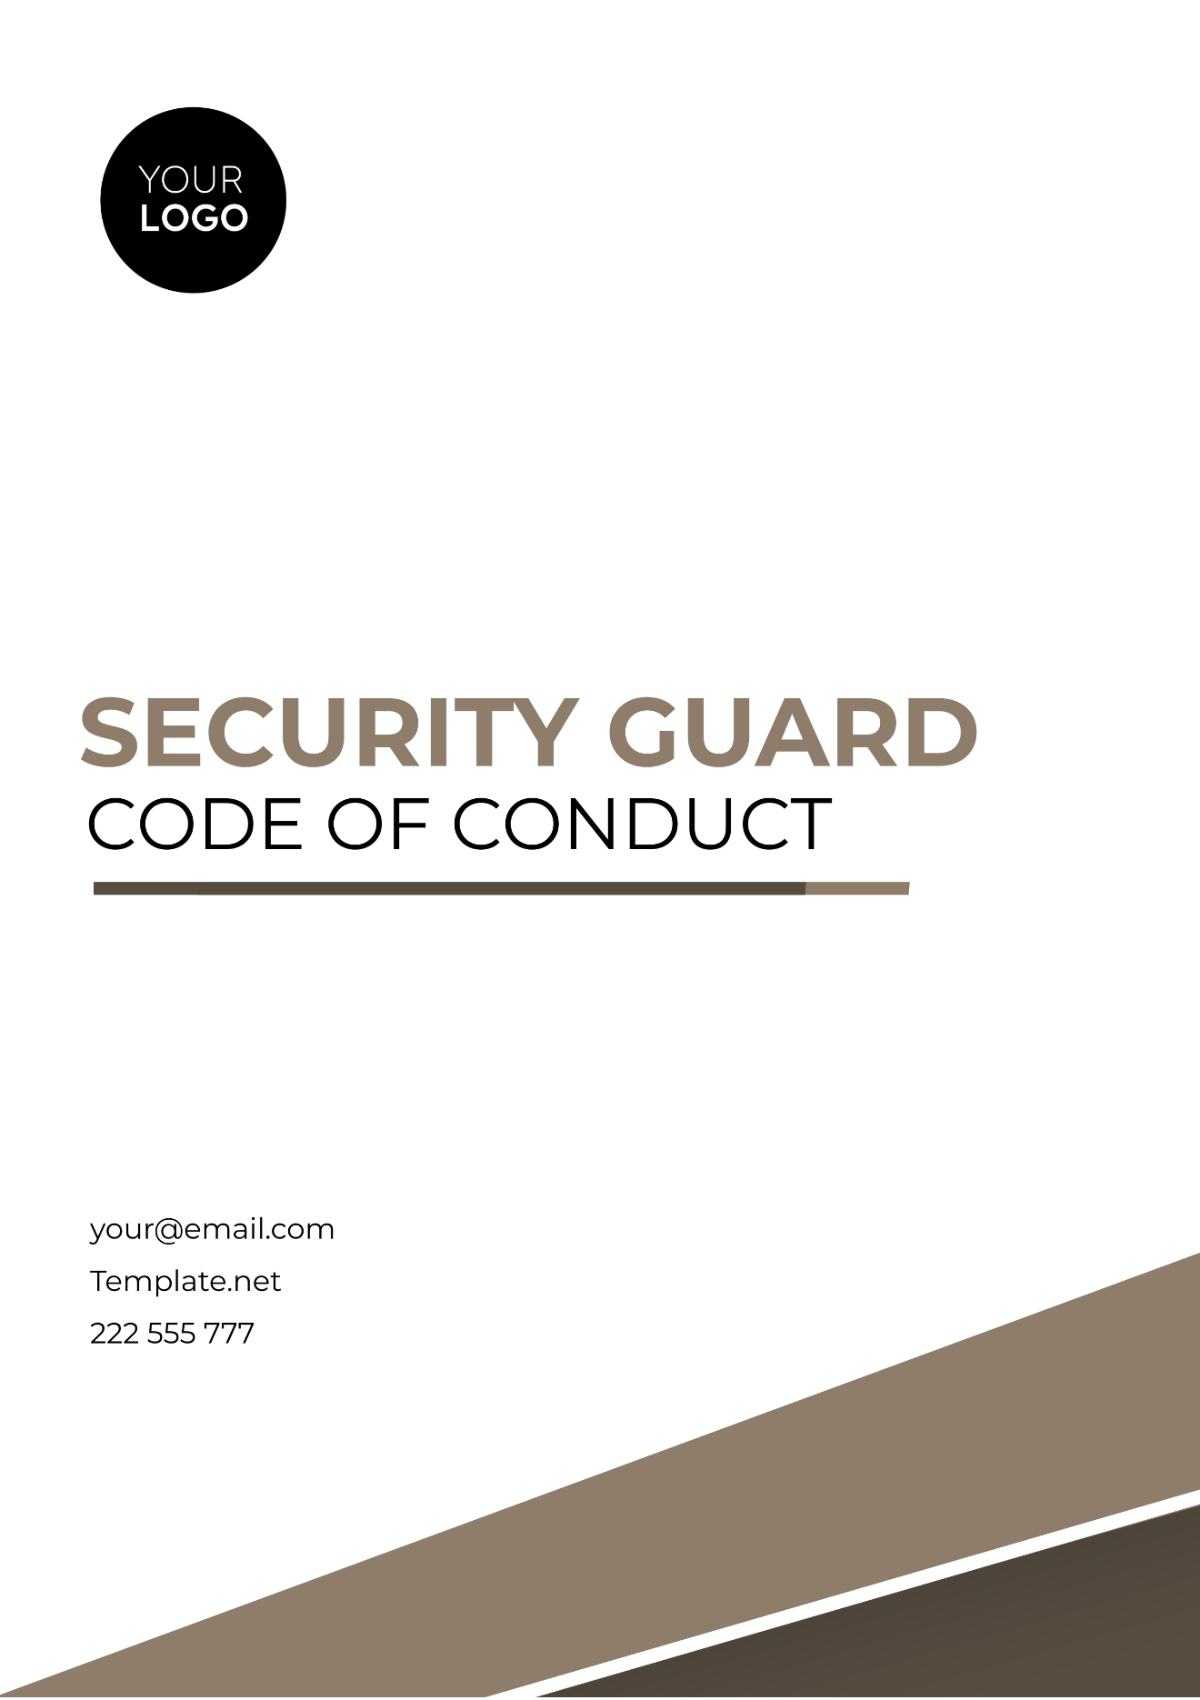 Security Guard Code of Conduct Template